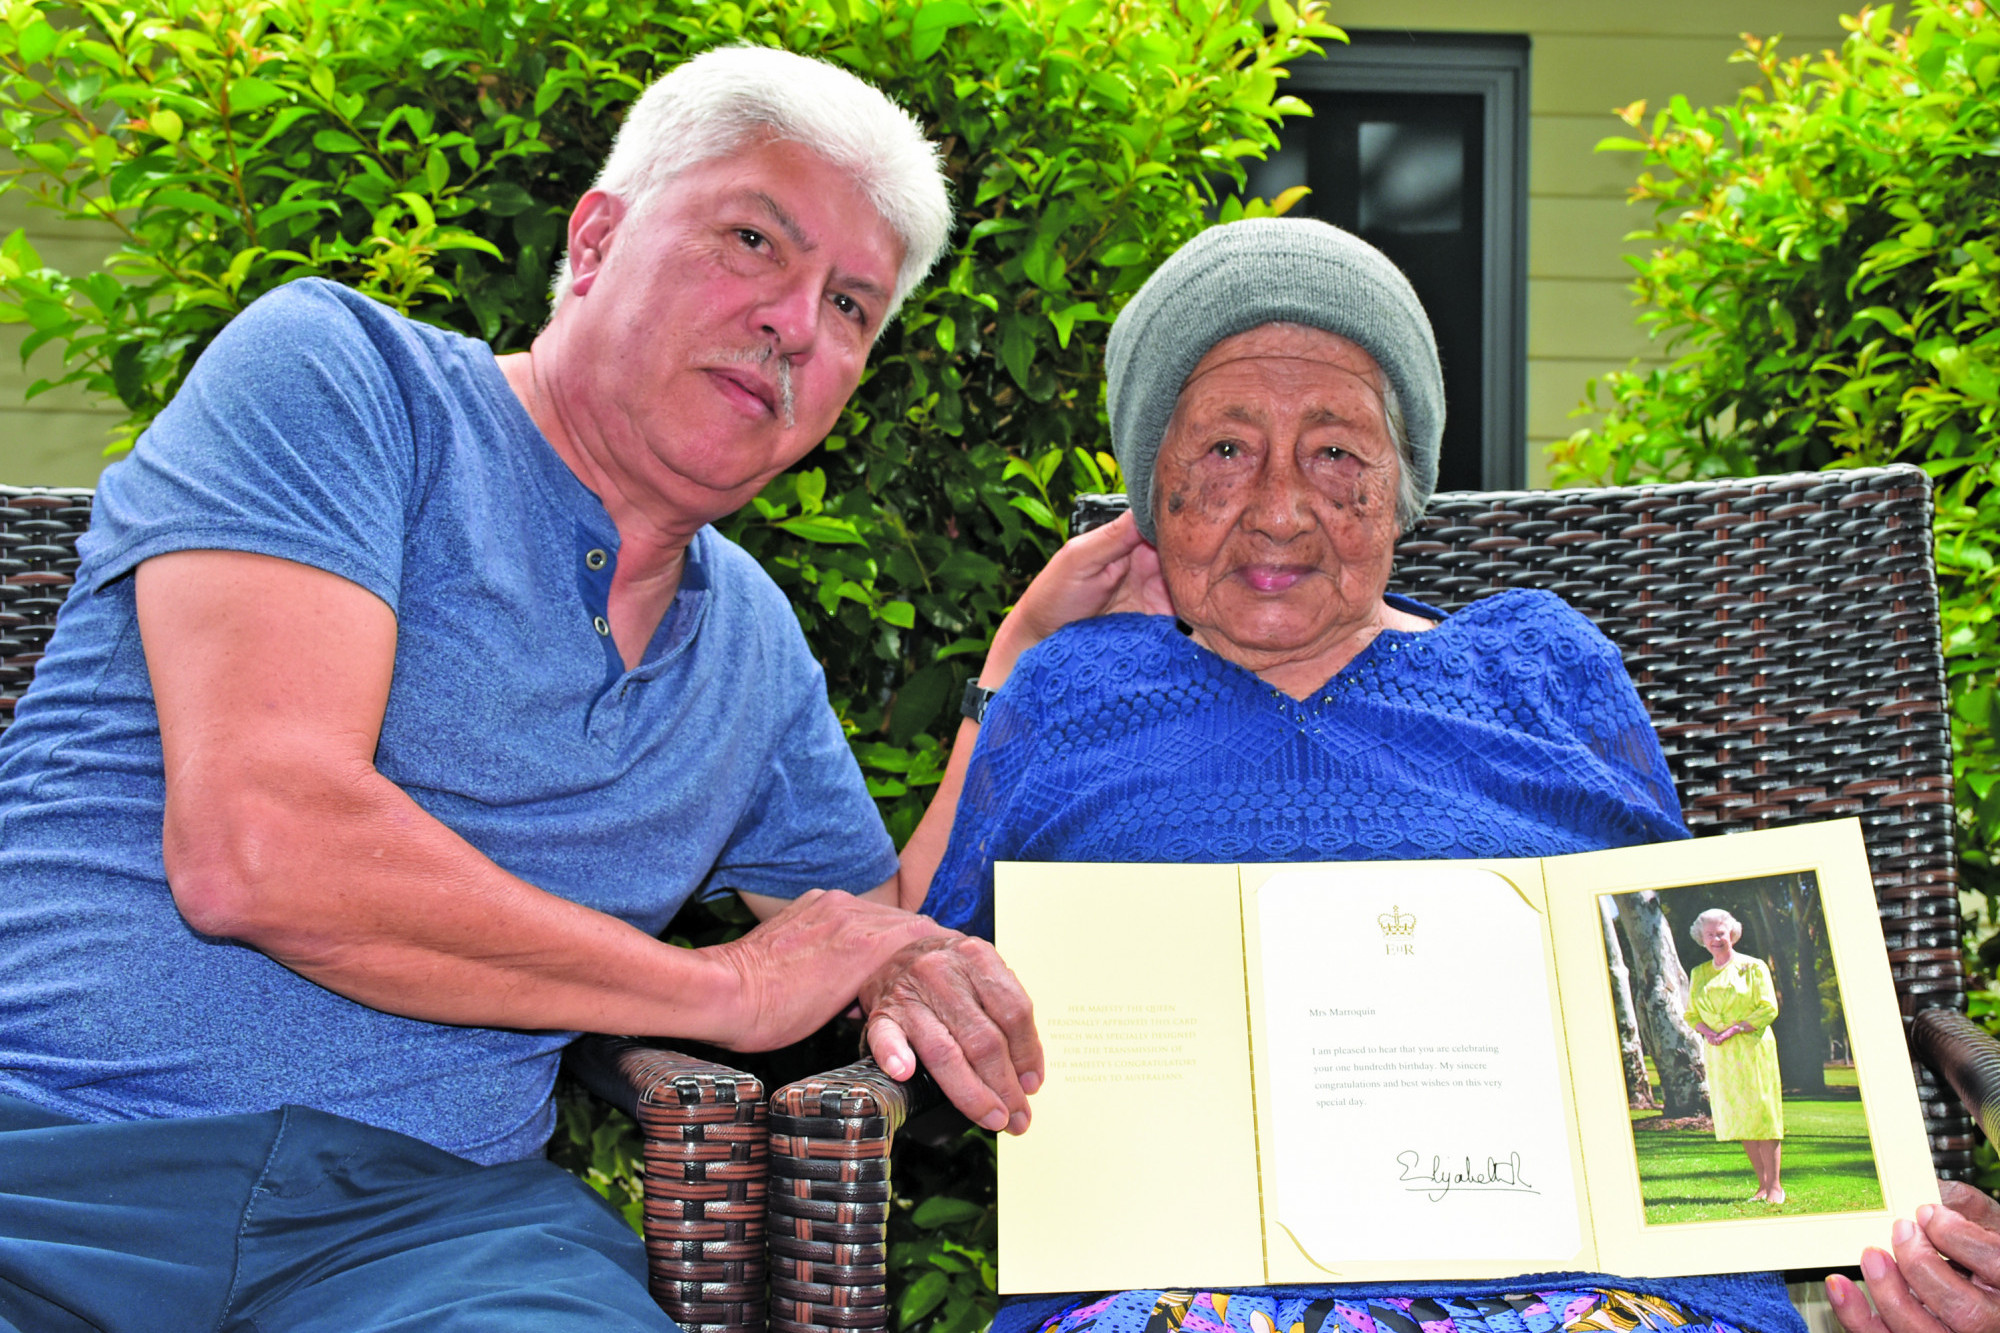 100TH BIRTHDAY: Oscar Alberto Marroquin with his 100 year old mother Maria Fabia Marroquin holding her letter from the Queen to celebrate her 100th birthday.